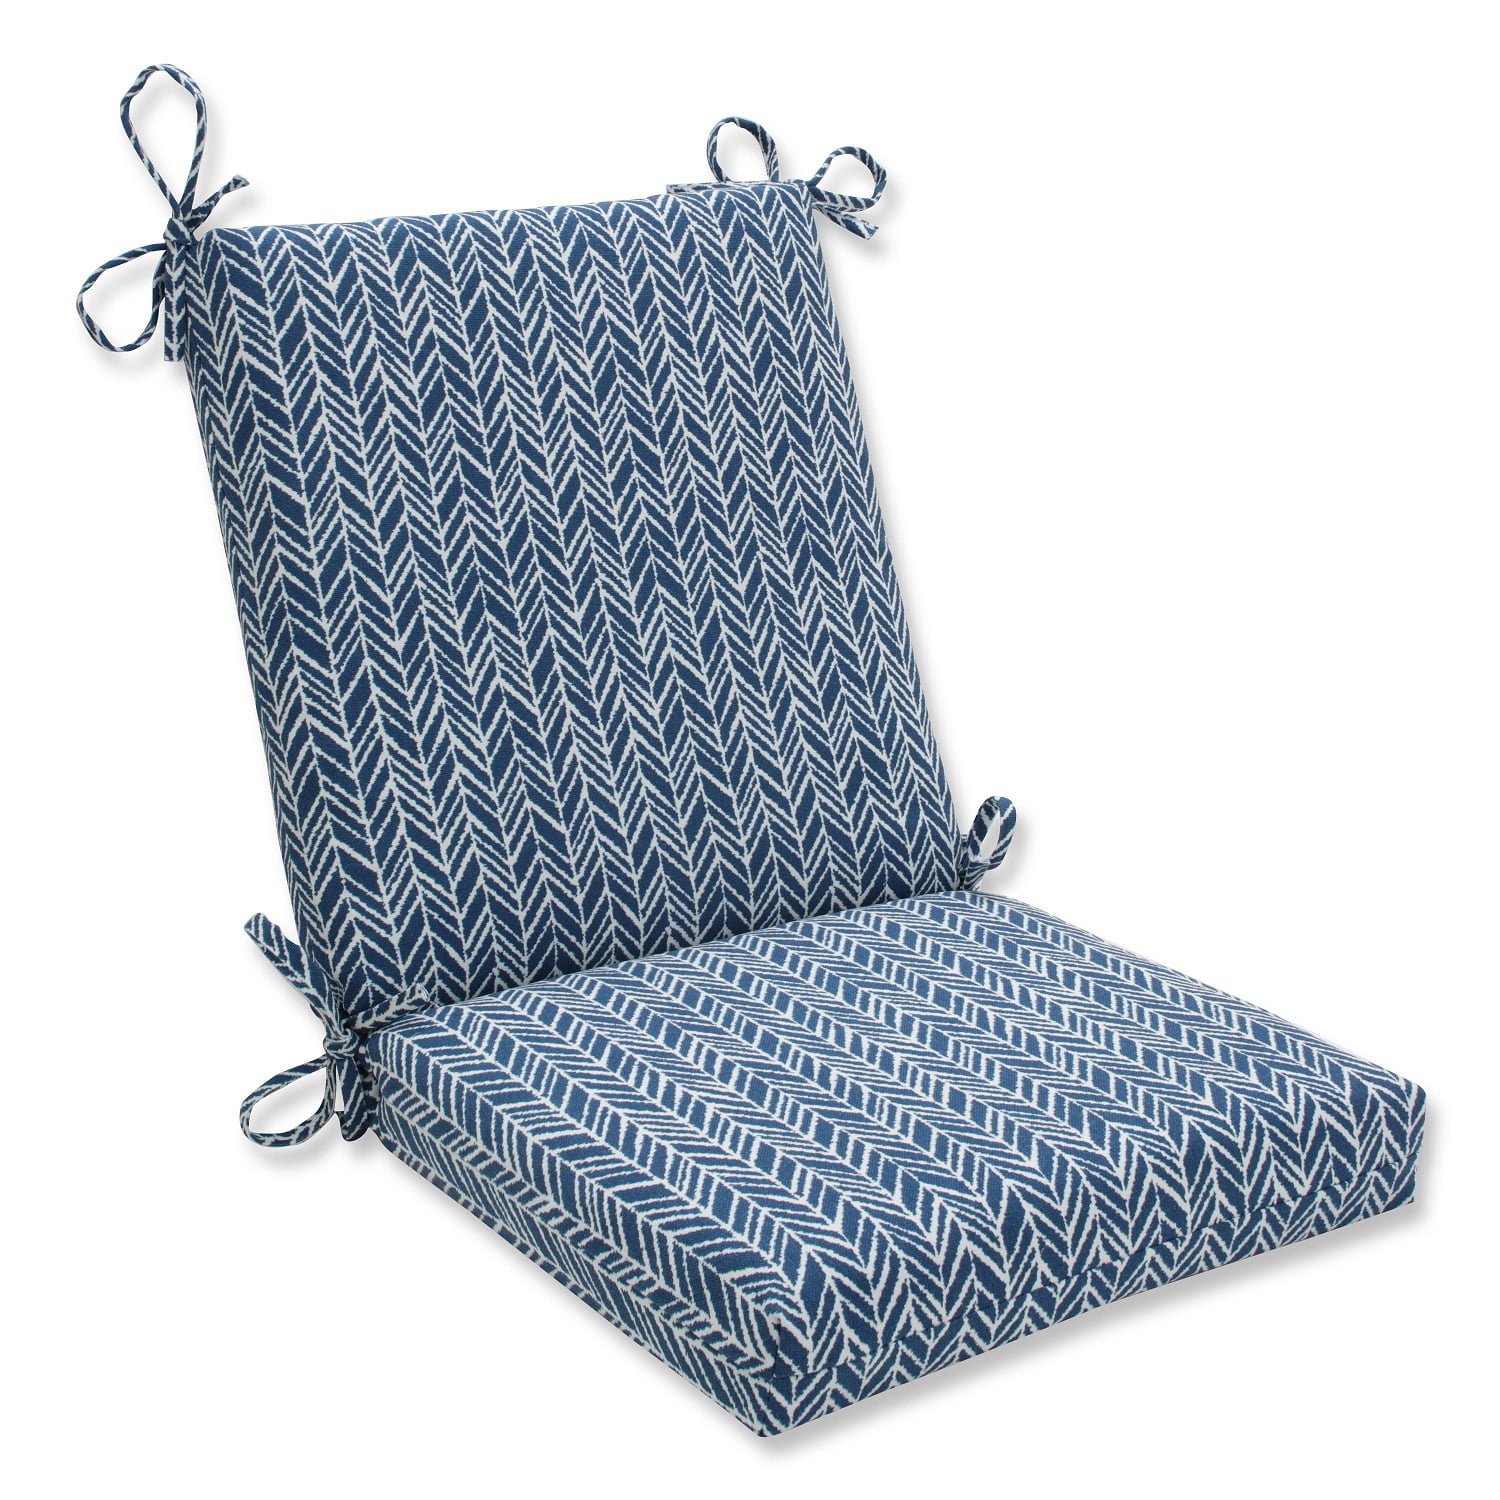 36.5” Blue and White Outdoor Patio Chair Cushion with Ties - Walmart